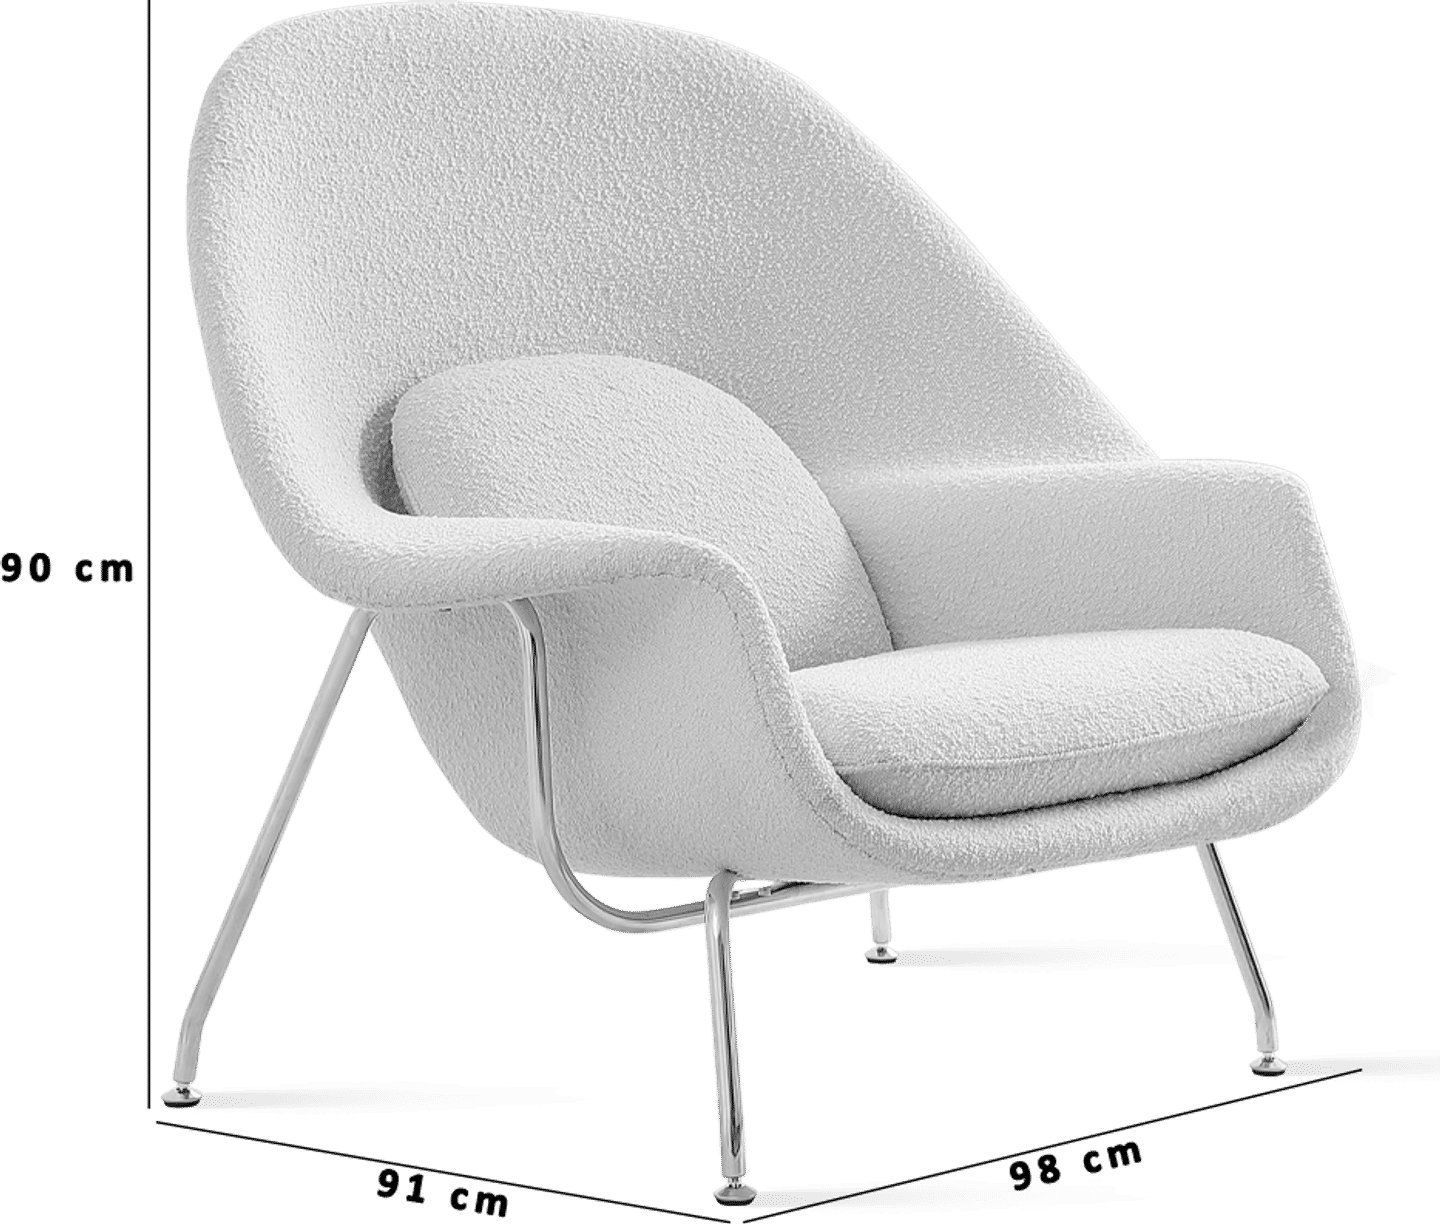 Womb Chair - Boucle Creamy Boucle/Boucle image.